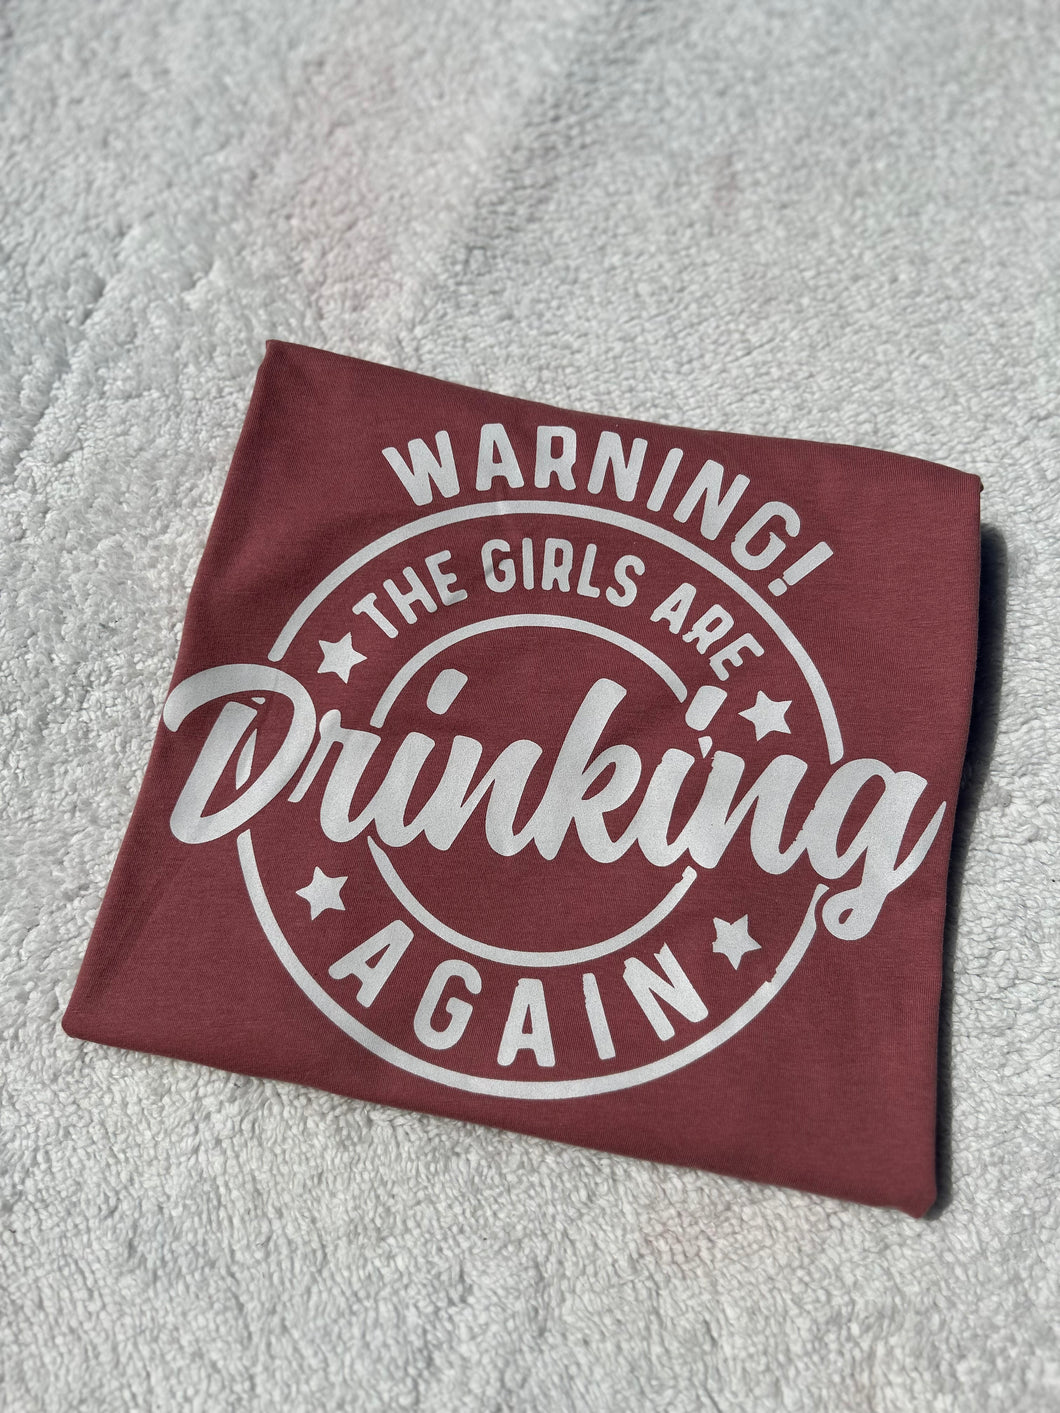 Warning! The Girls Are Drinking Again